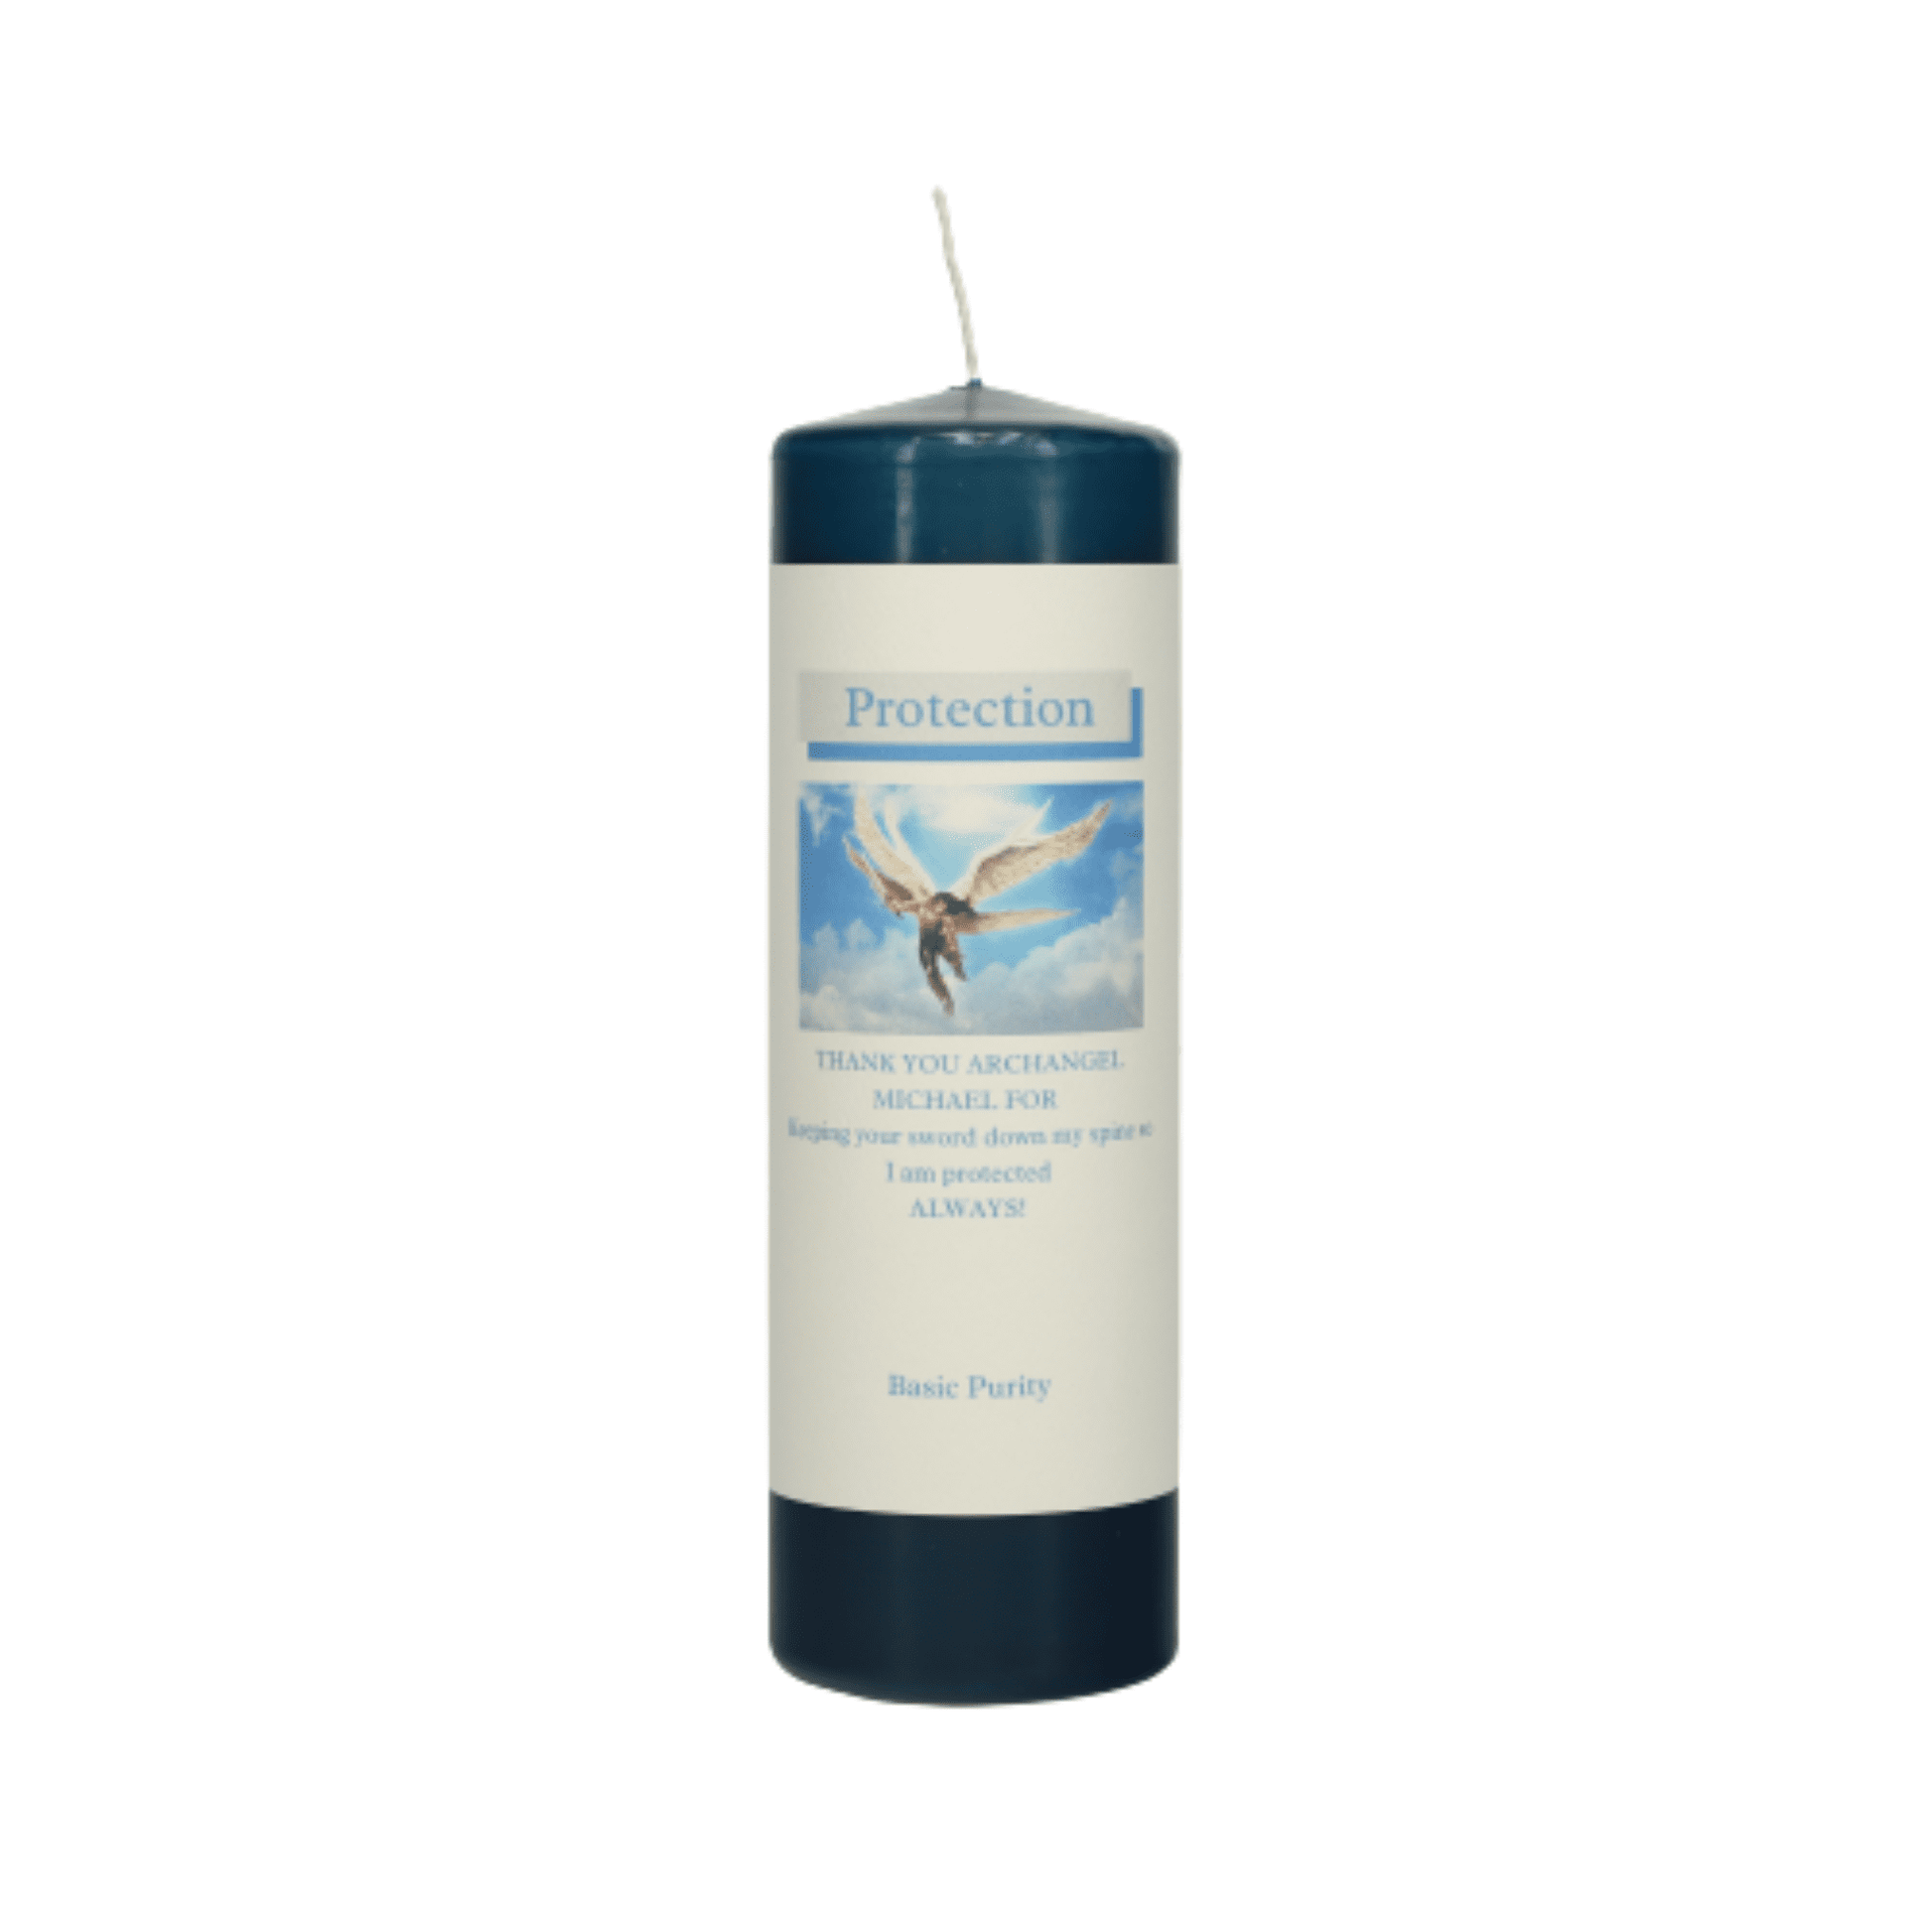 archangel michael protection candles by Mary Armendarez